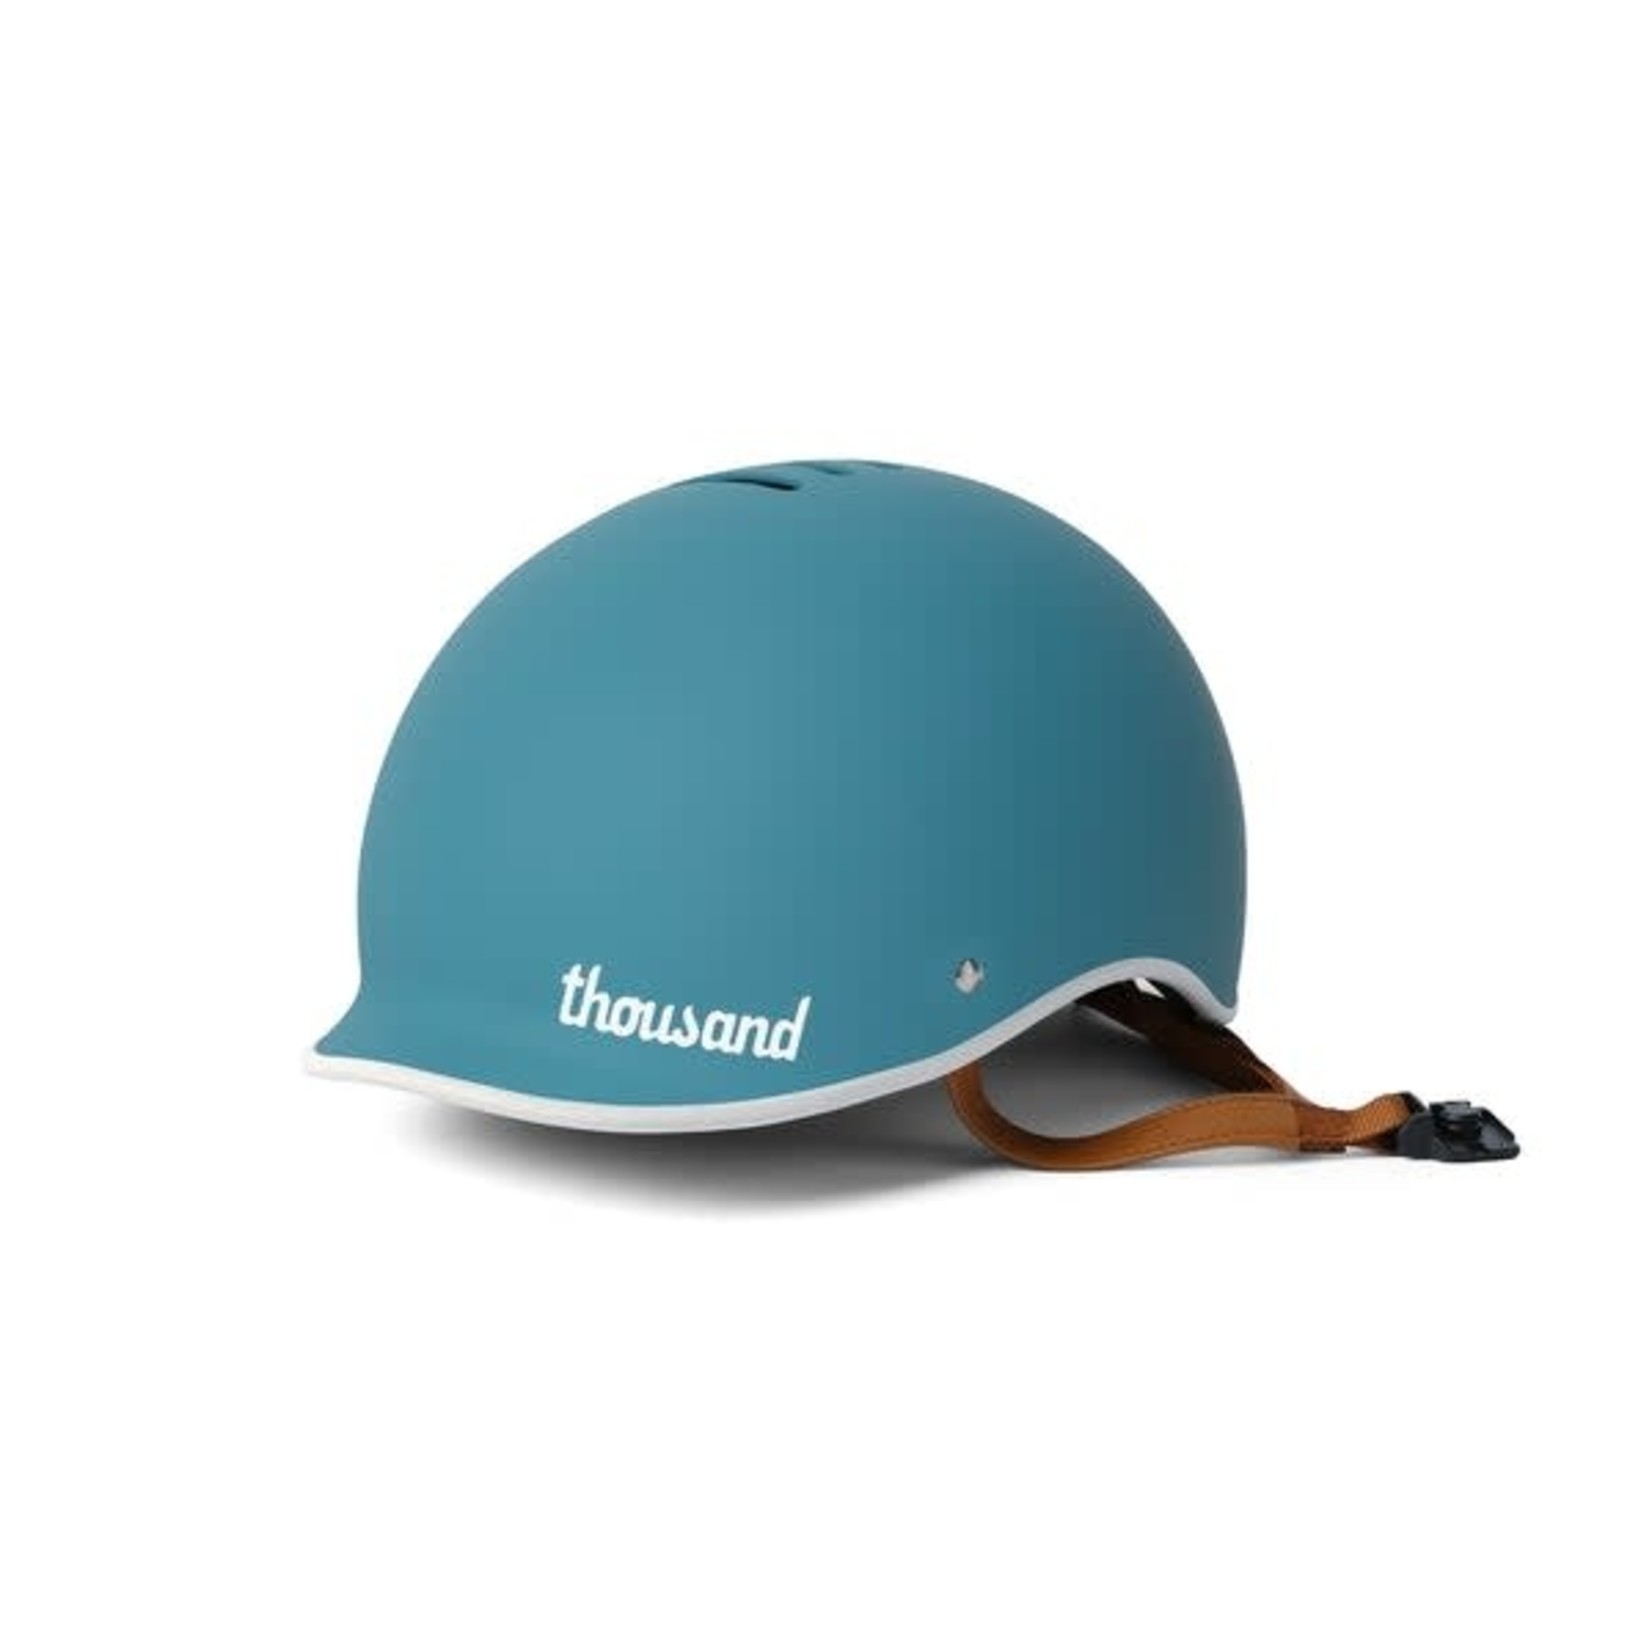 THOUSAND Heritage Climate Collection/Coastal Blue/Large